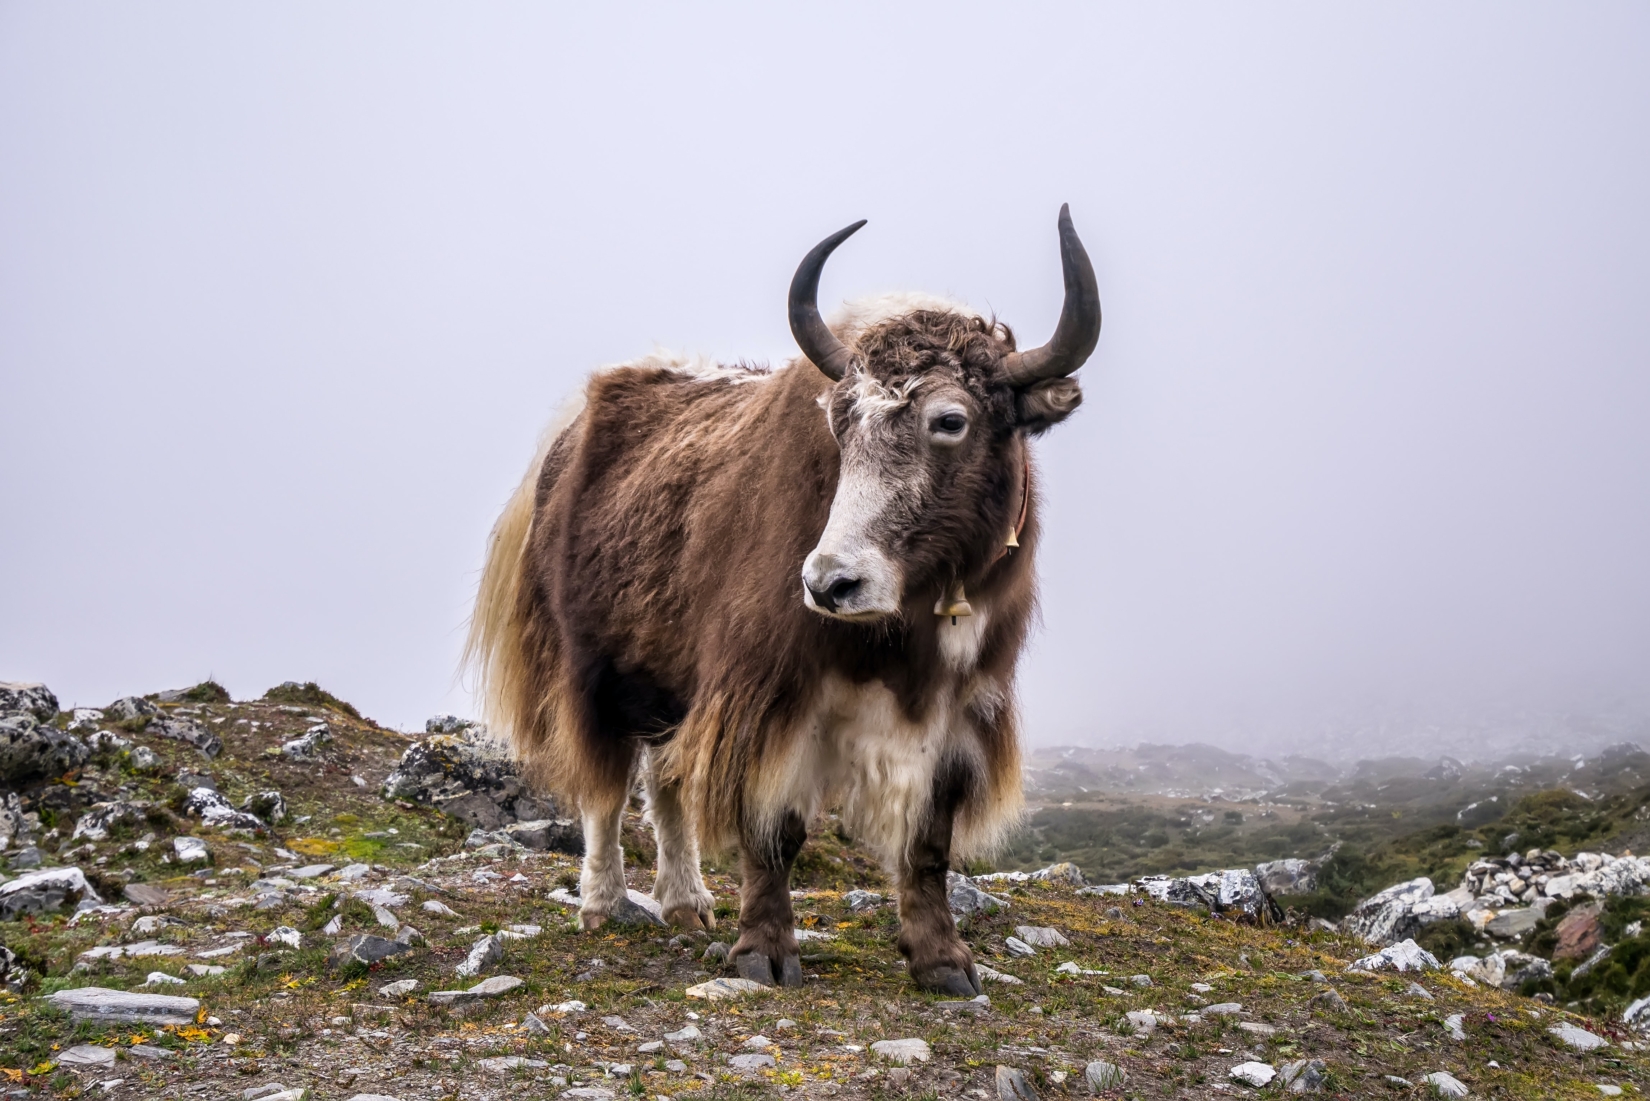 A photograph of a yak in the Himalayas, on a misty day in the mountains of Nepal